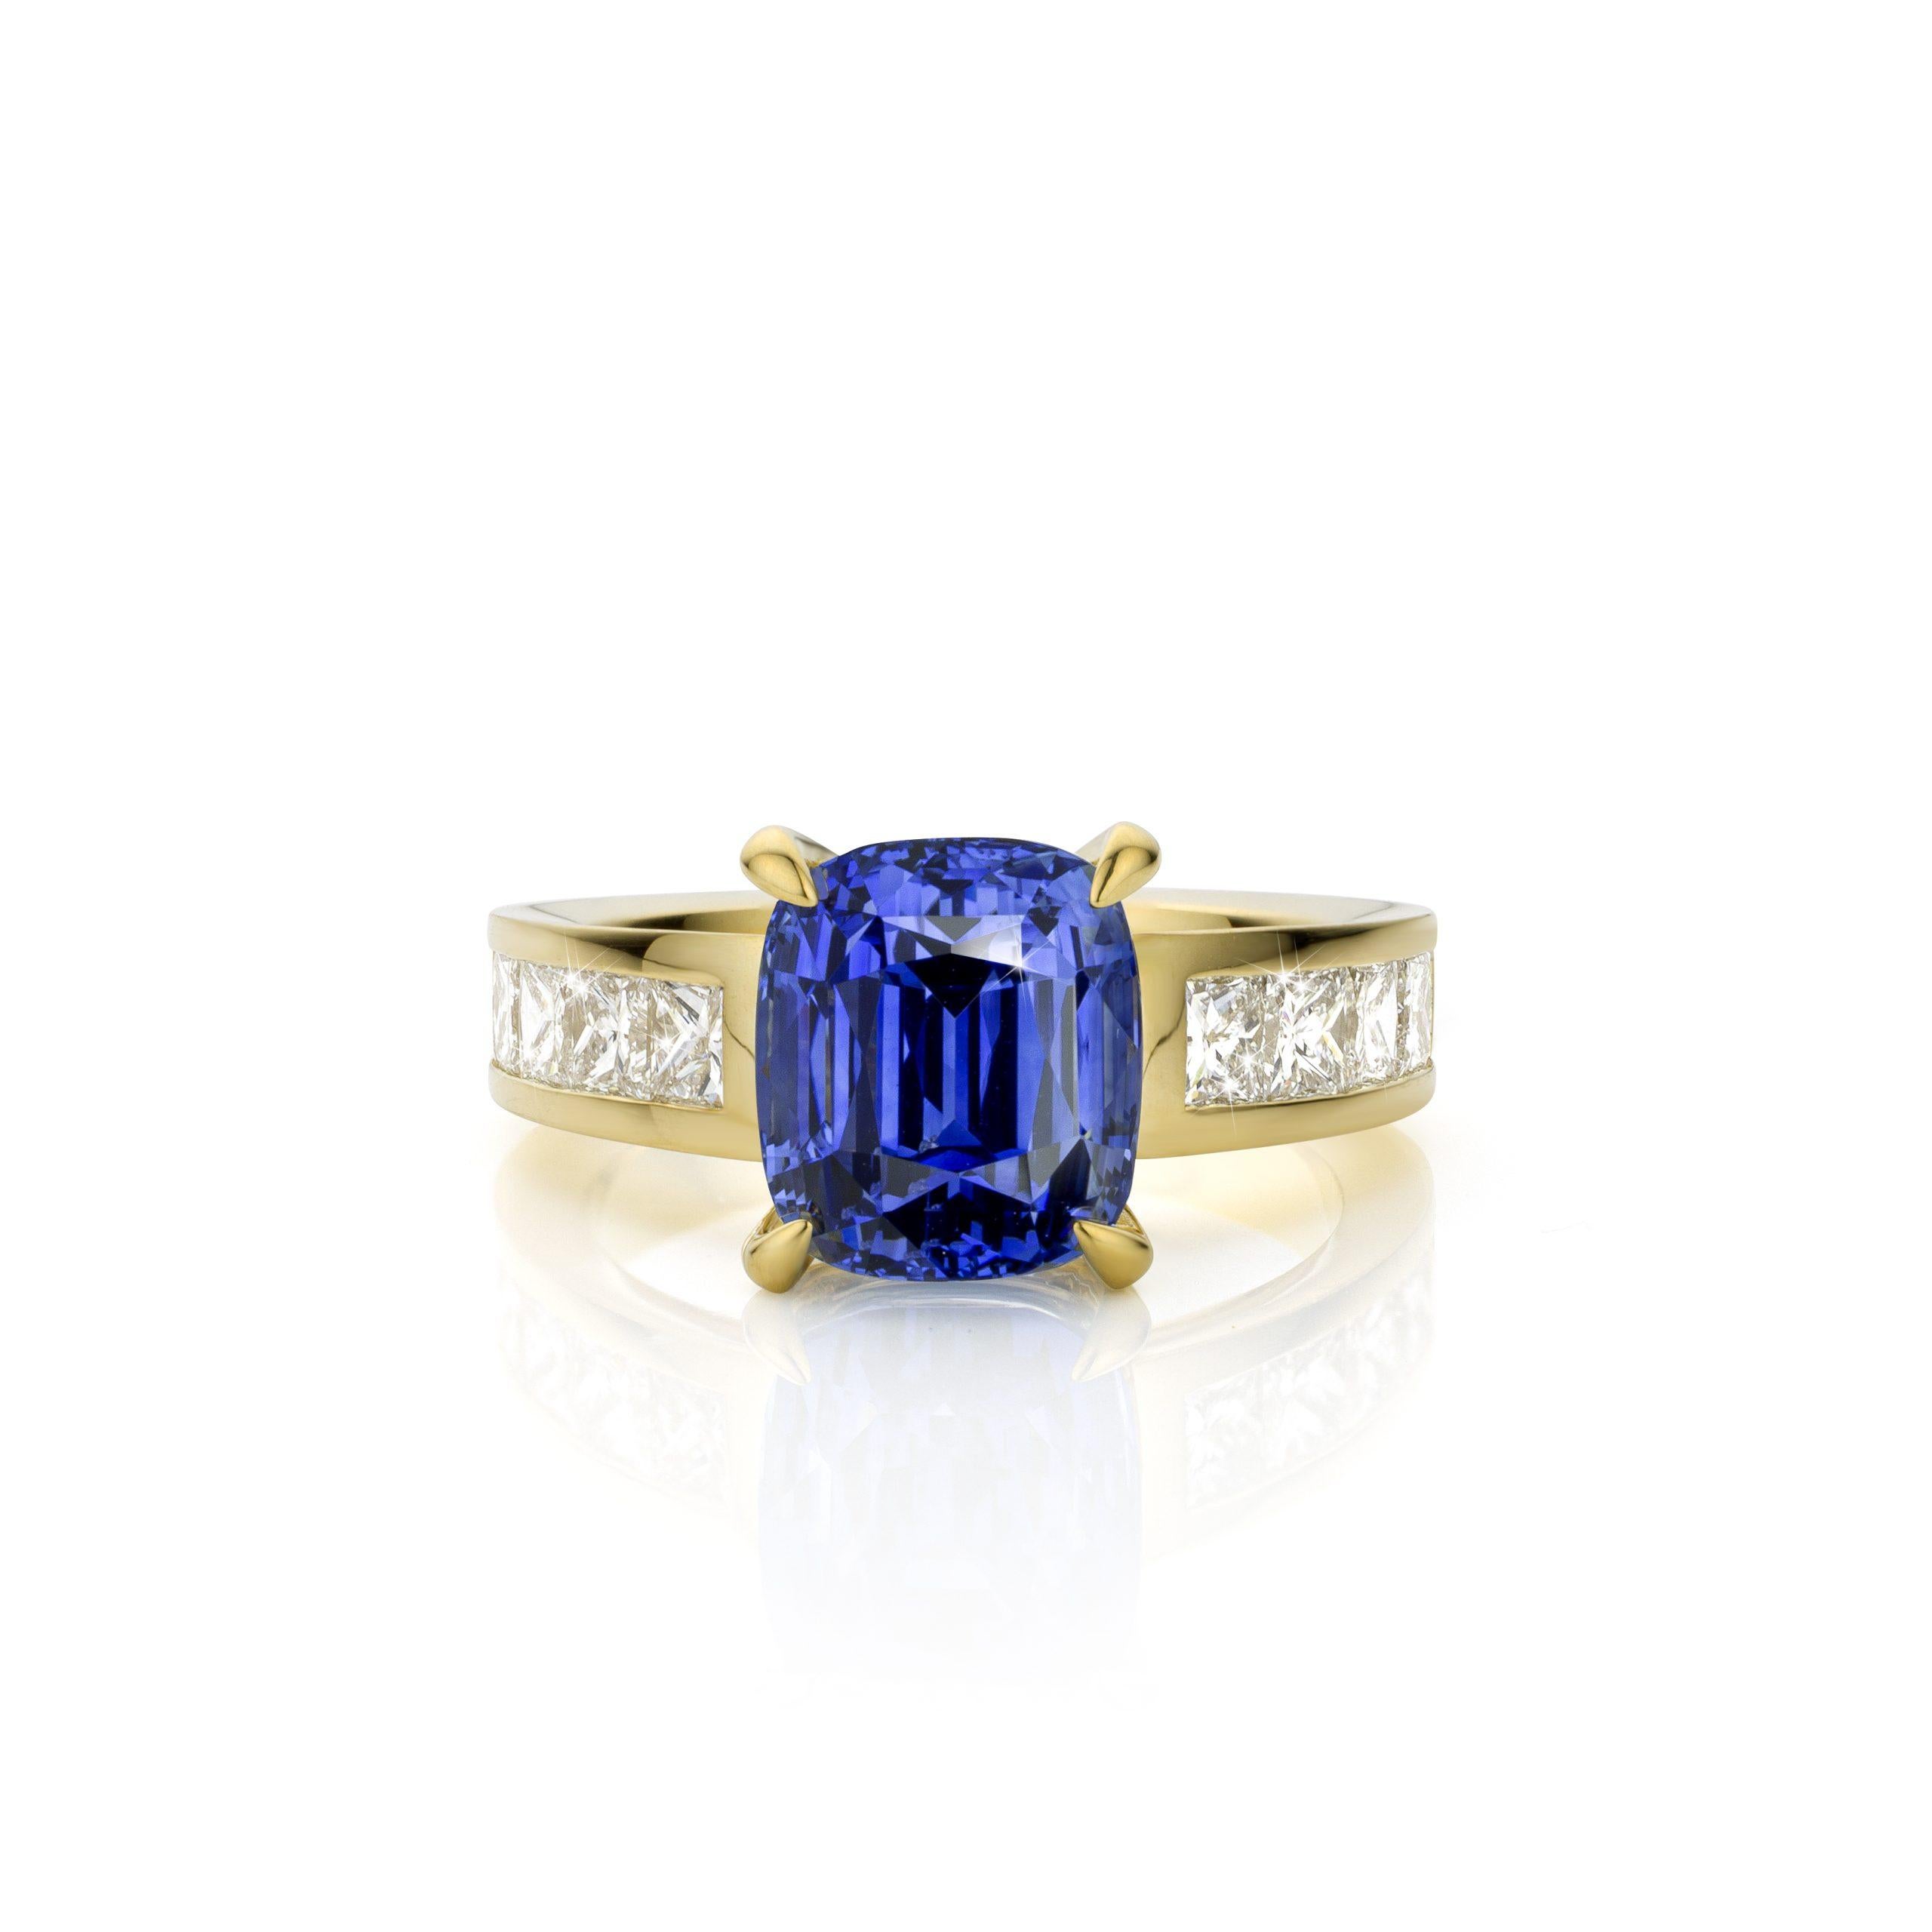 For Sale:  Cober “Beautiful blue” with 6.07 Carat Sapphire and Diamonds Yellow Gold Ring  4